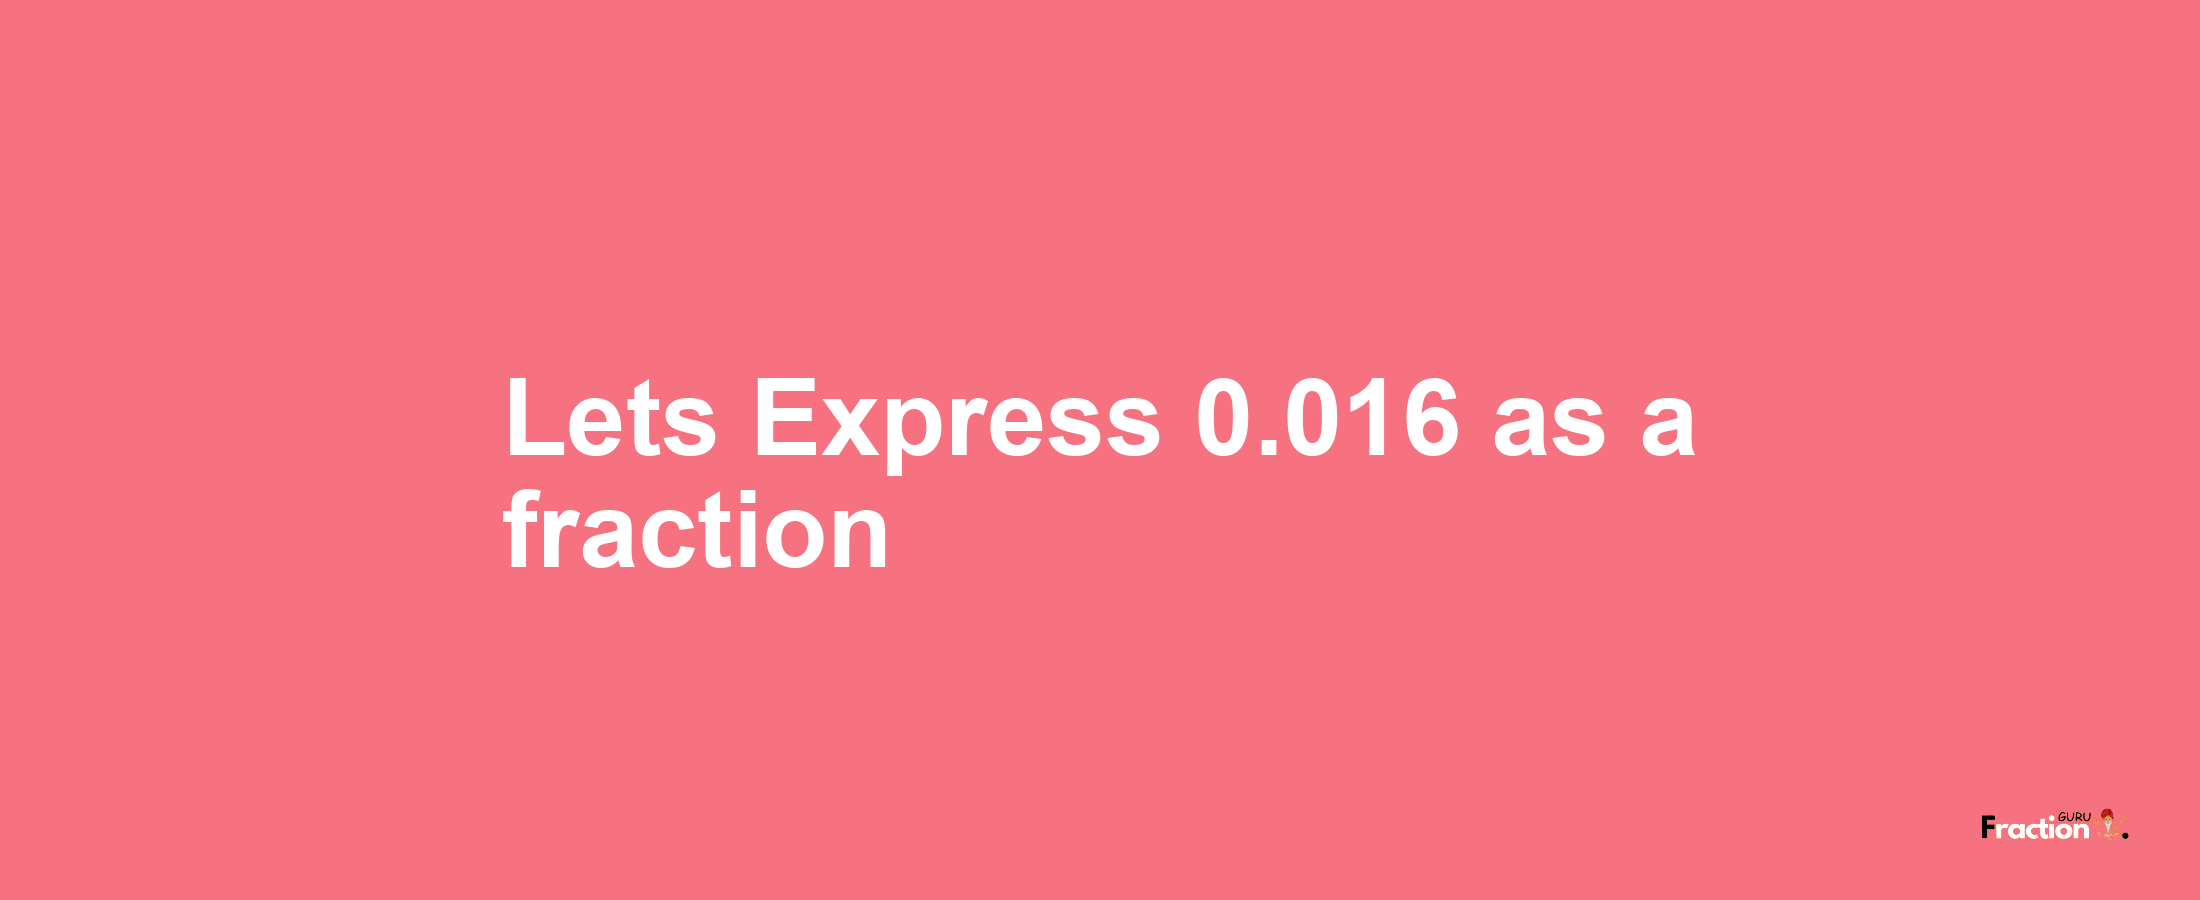 Lets Express 0.016 as afraction